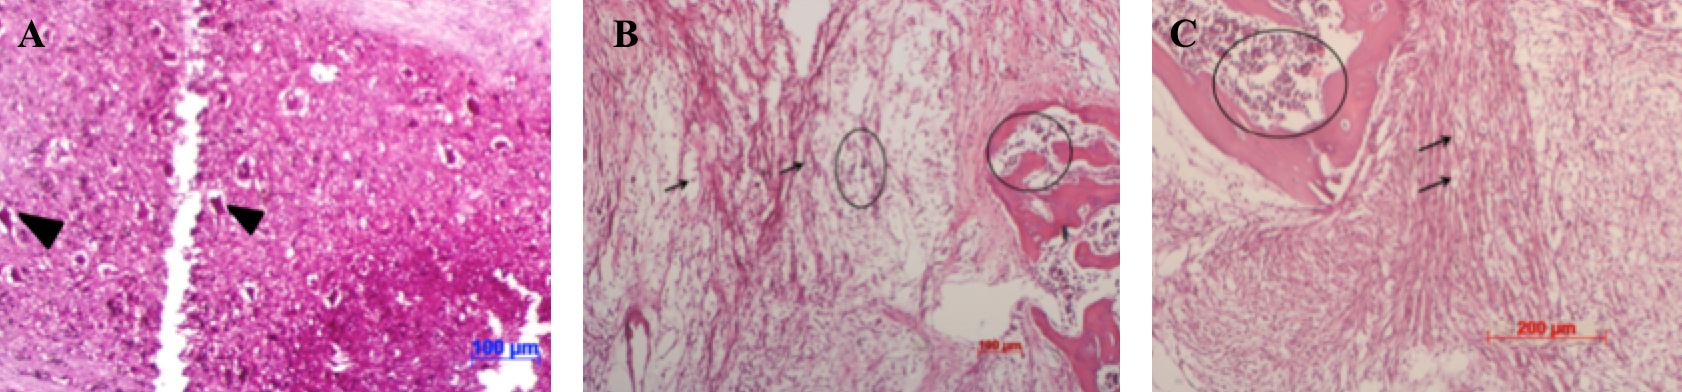 Figure 6
Damaged spinal cord tissue structures of mice with SCI after various treatments